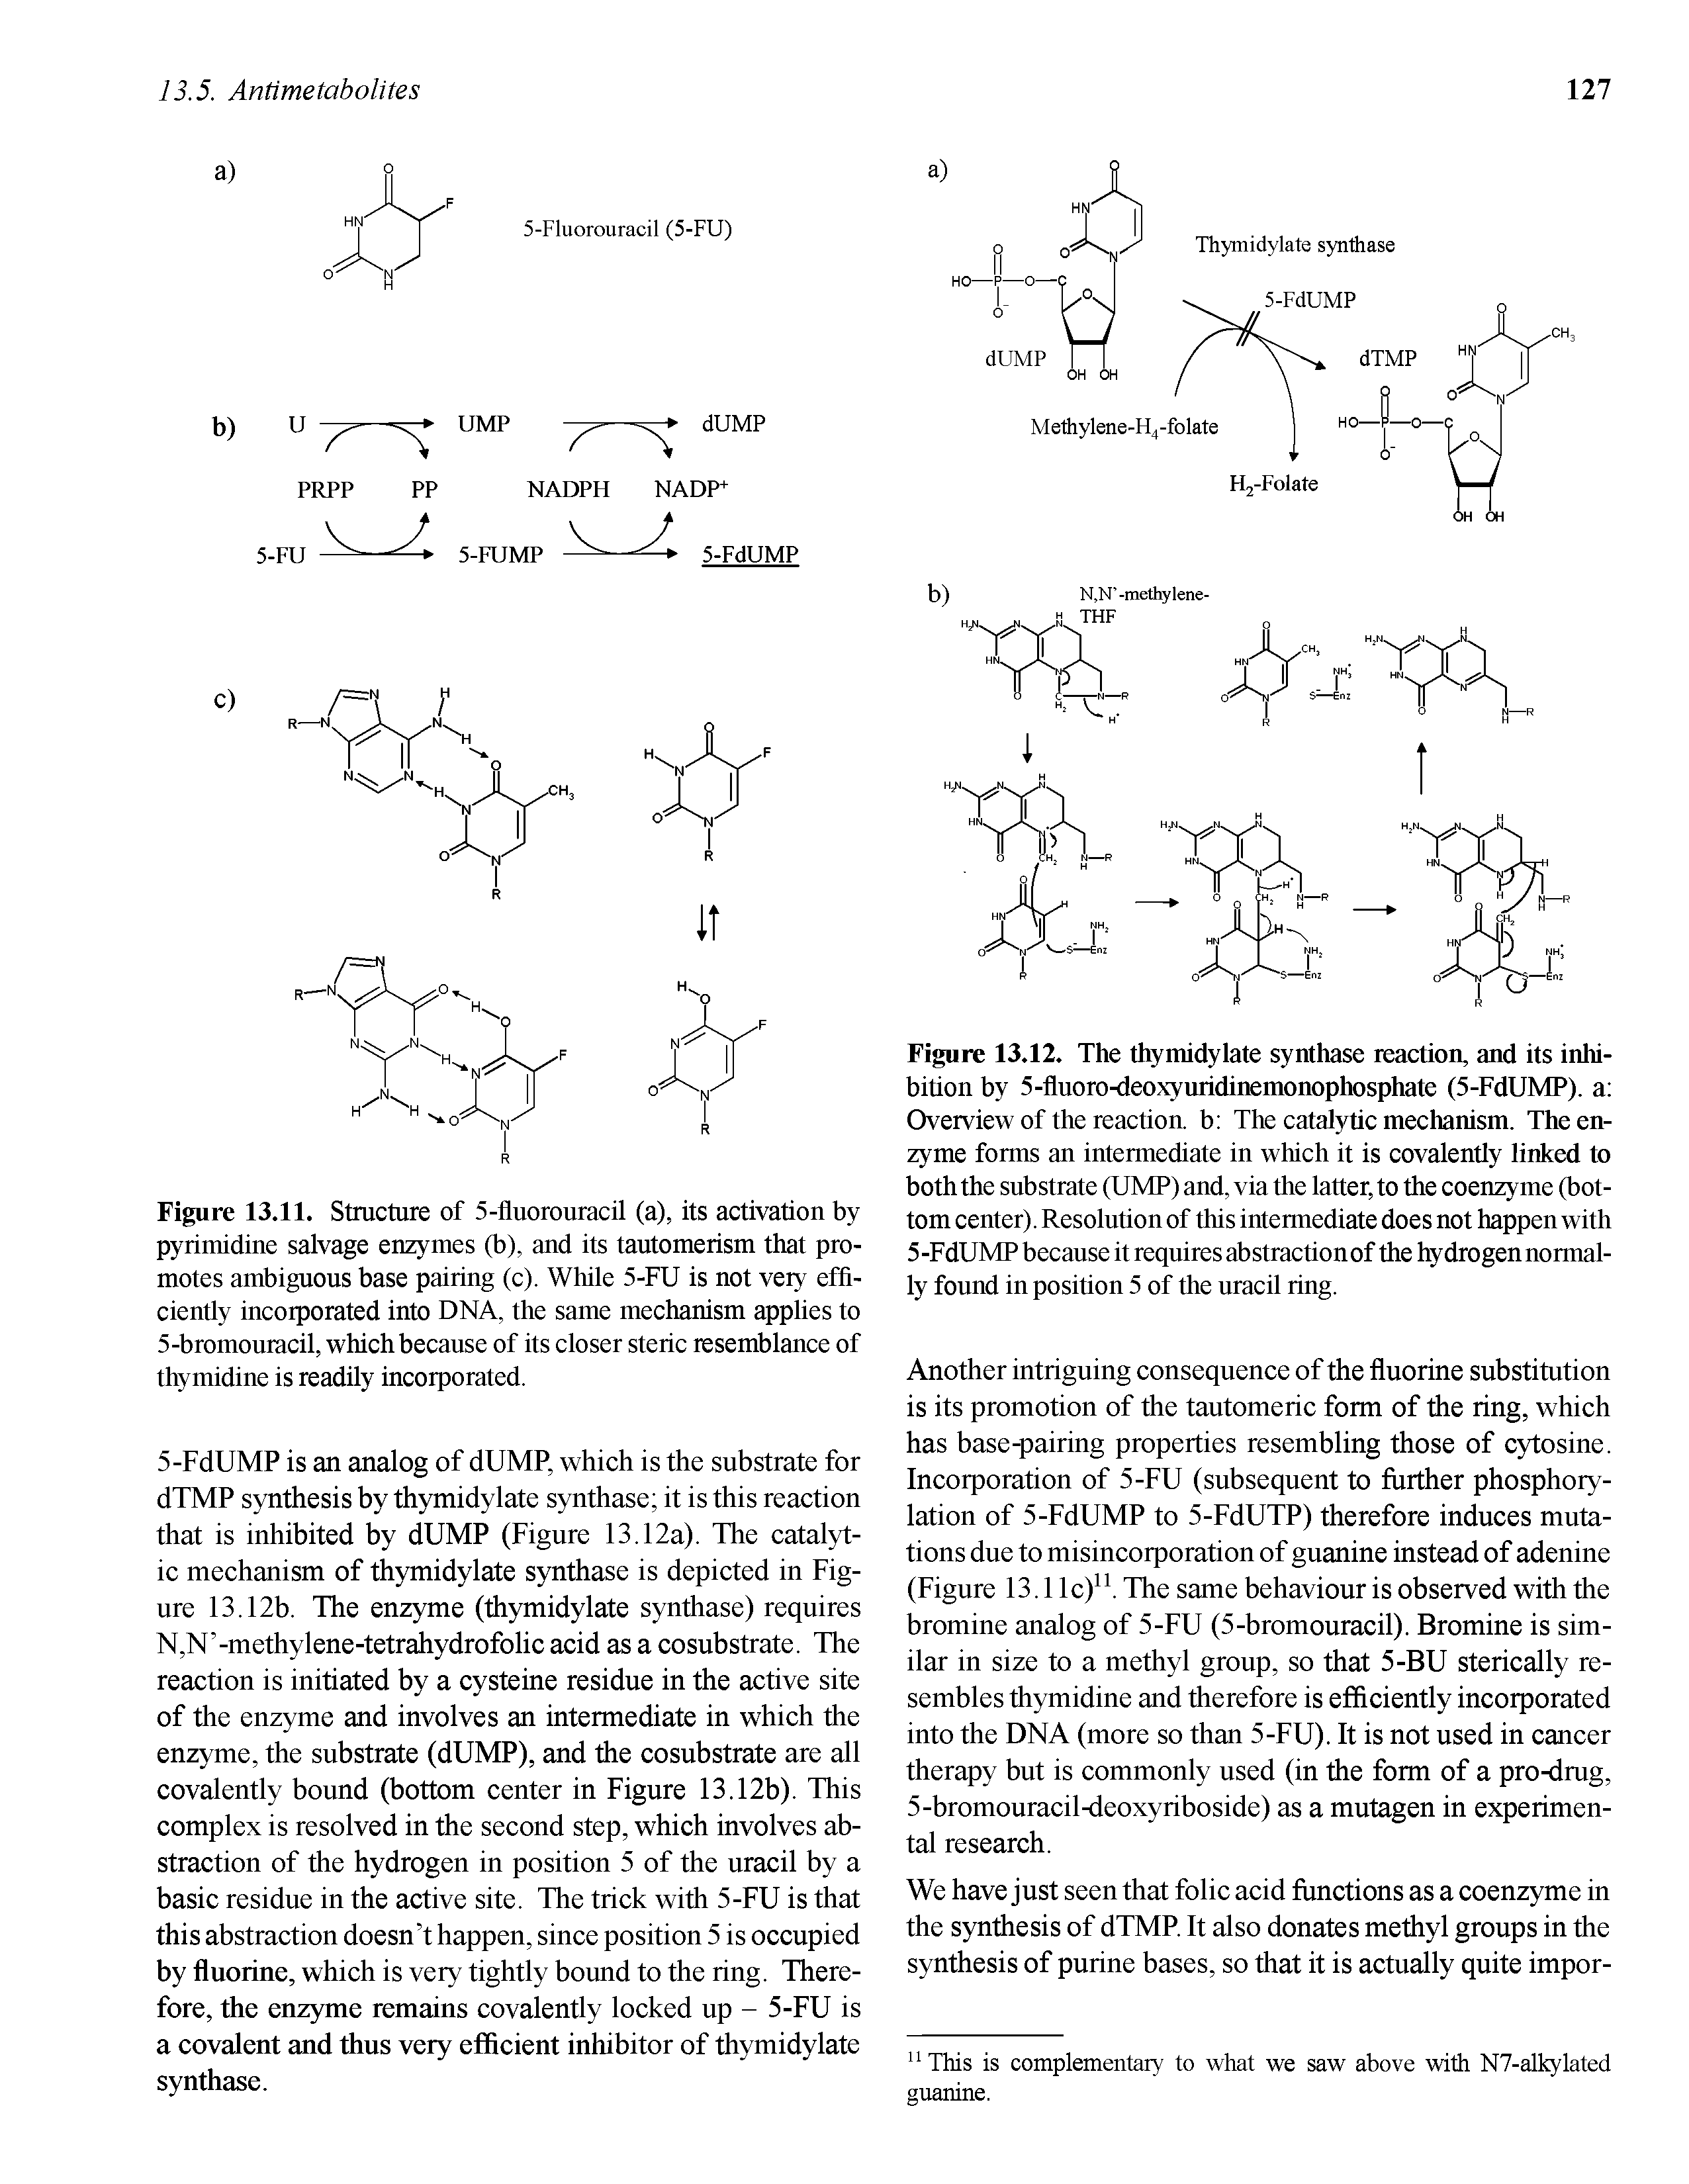 Figure 13.11. Structure of 5-fluorouracil (a), its activation by pyrimidine salvage enzymes (b), and its tautomerism that promotes ambiguous base pairing (c). While 5-FU is not very efficiently incorporated into DNA, the same mechanism applies to 5-bromonracil, whichbecanse of its closer steric resemblance of thymidine is readily incorporated.